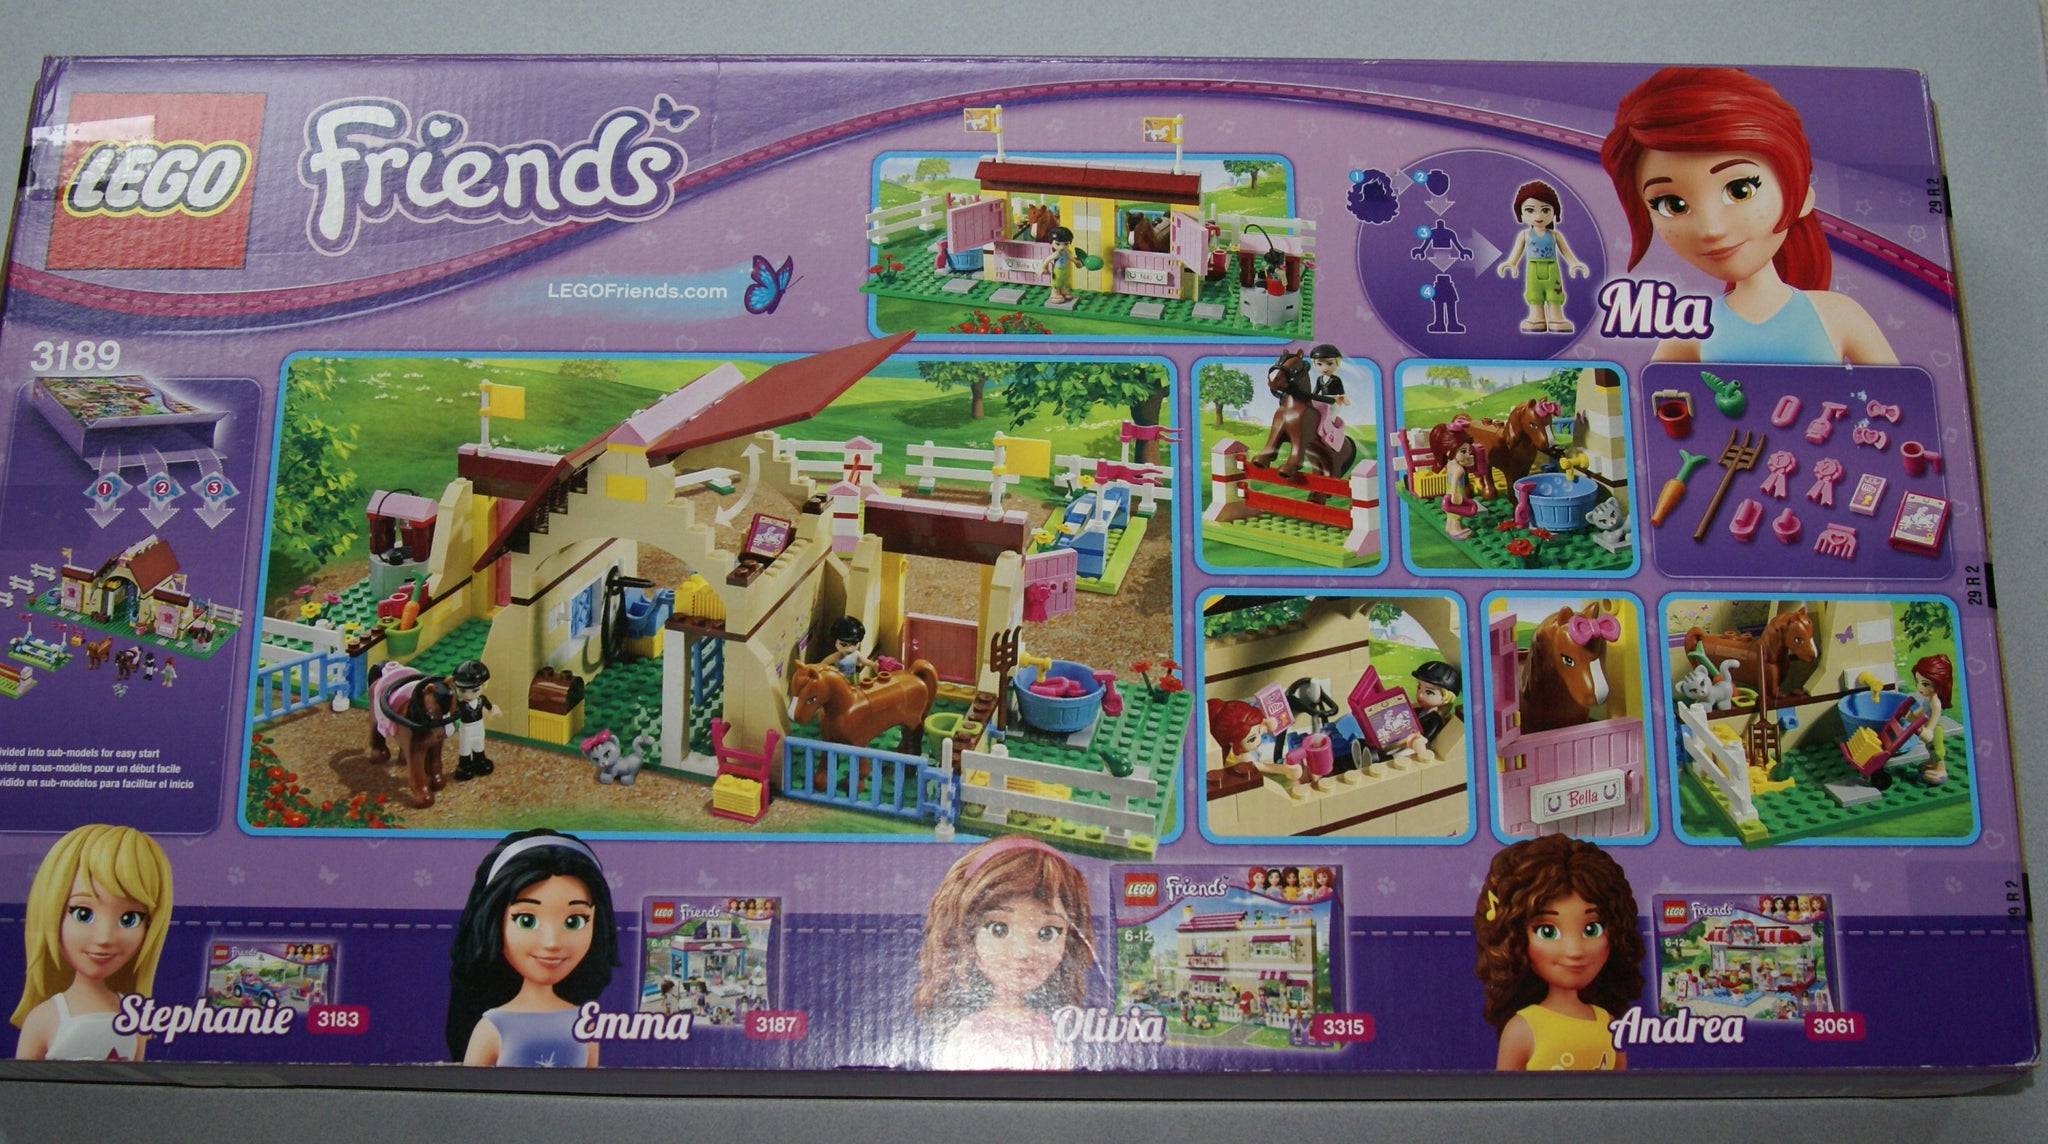 Now LEGO Friends, Kit 3189. (414 PIECES) Heartlake Stable Finds